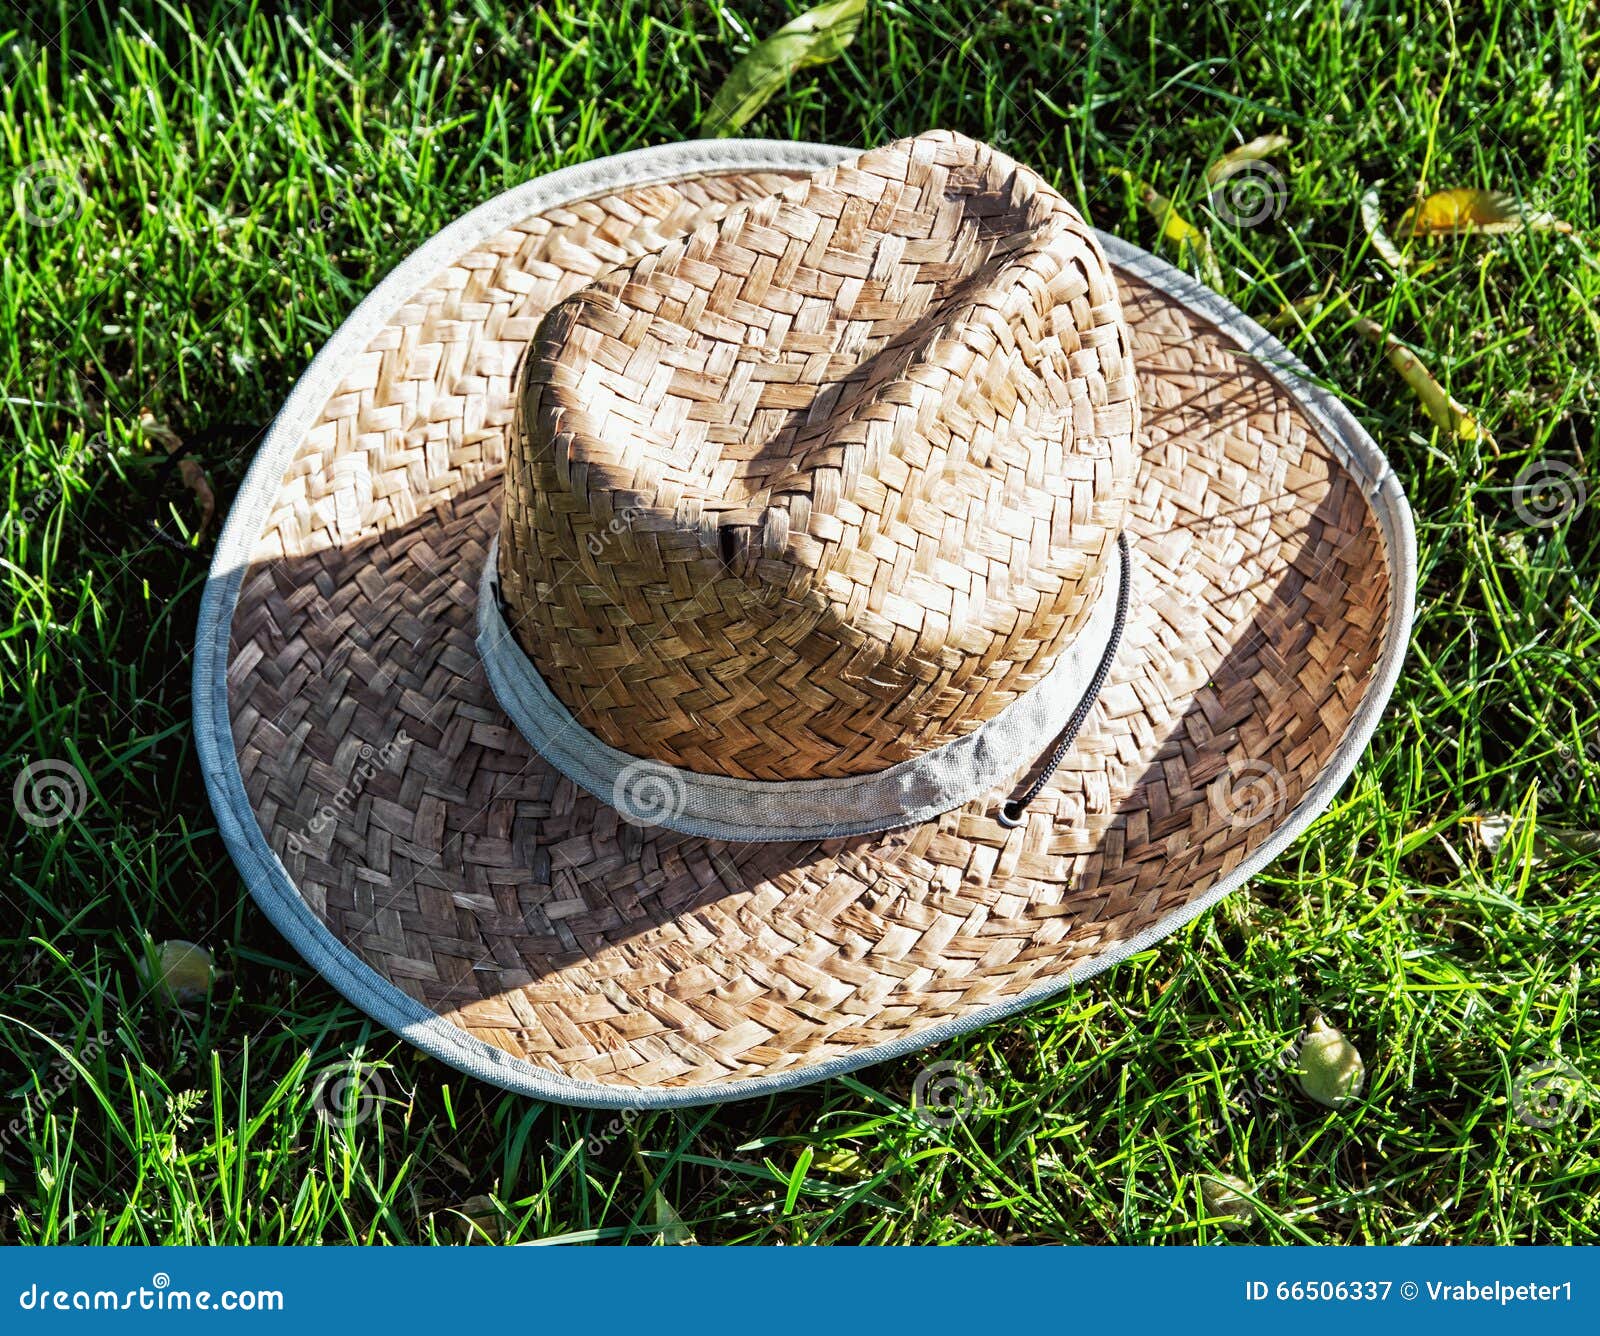 Farmer S Yellow Straw Hat in the Grass Stock Image - Image of life ...